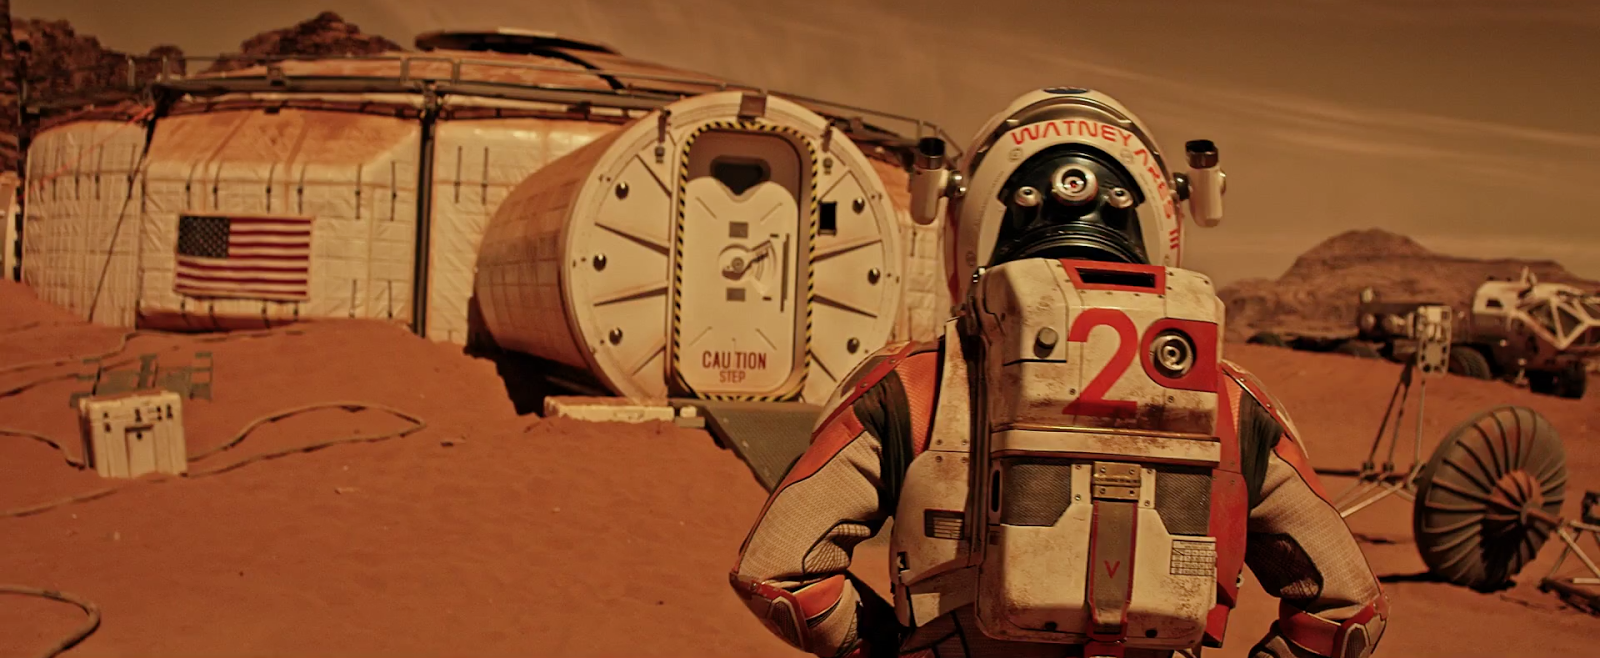 HD image from The Martian movie. The martian, Space exploration, Moon landing